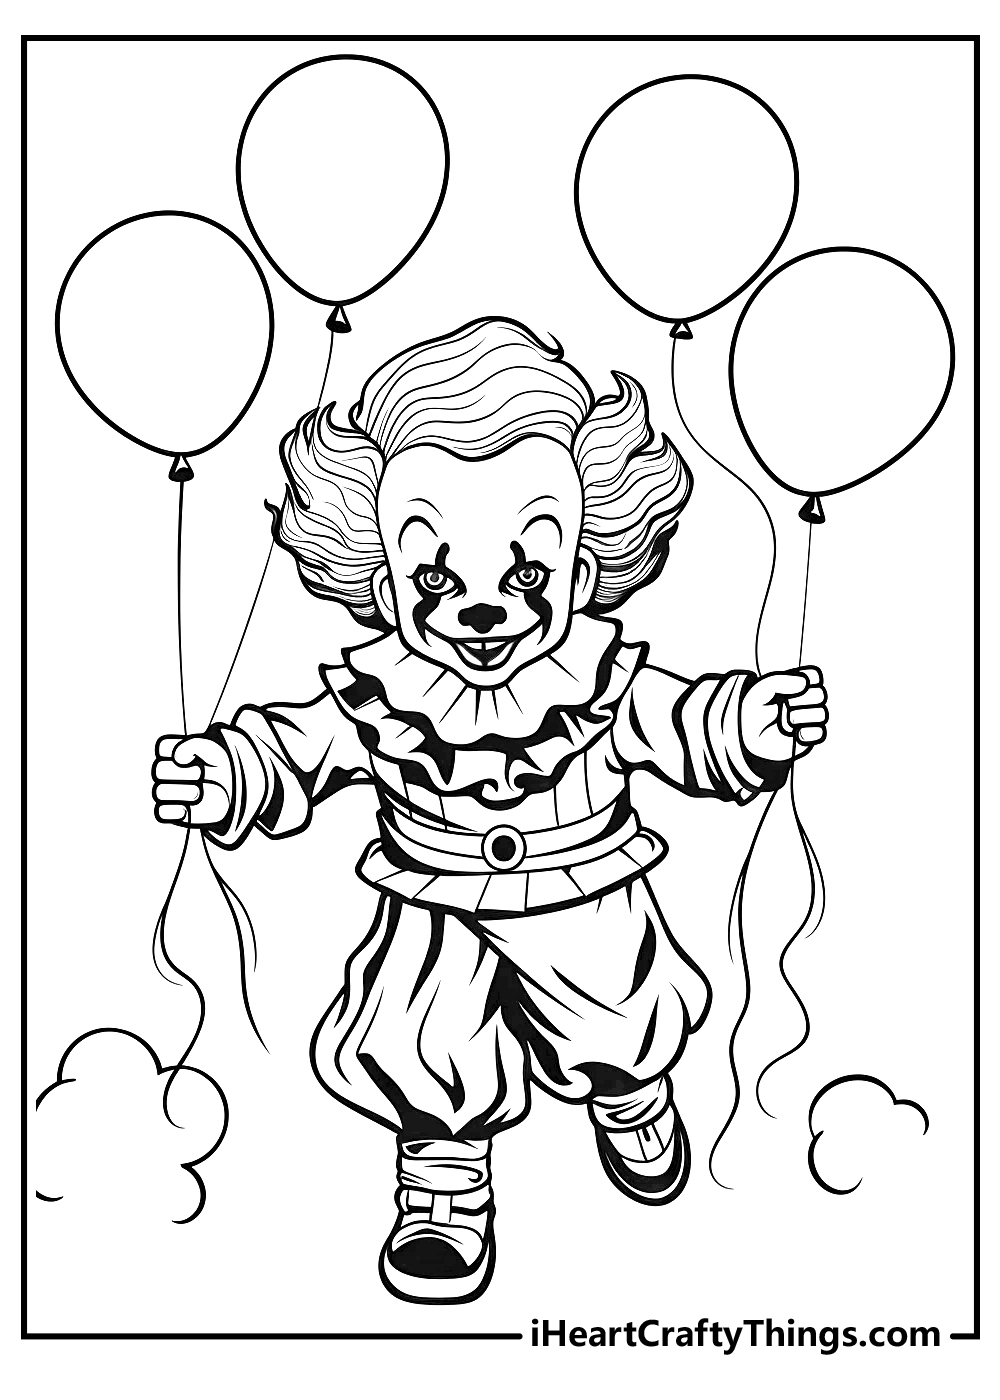 pennywise coloring pages